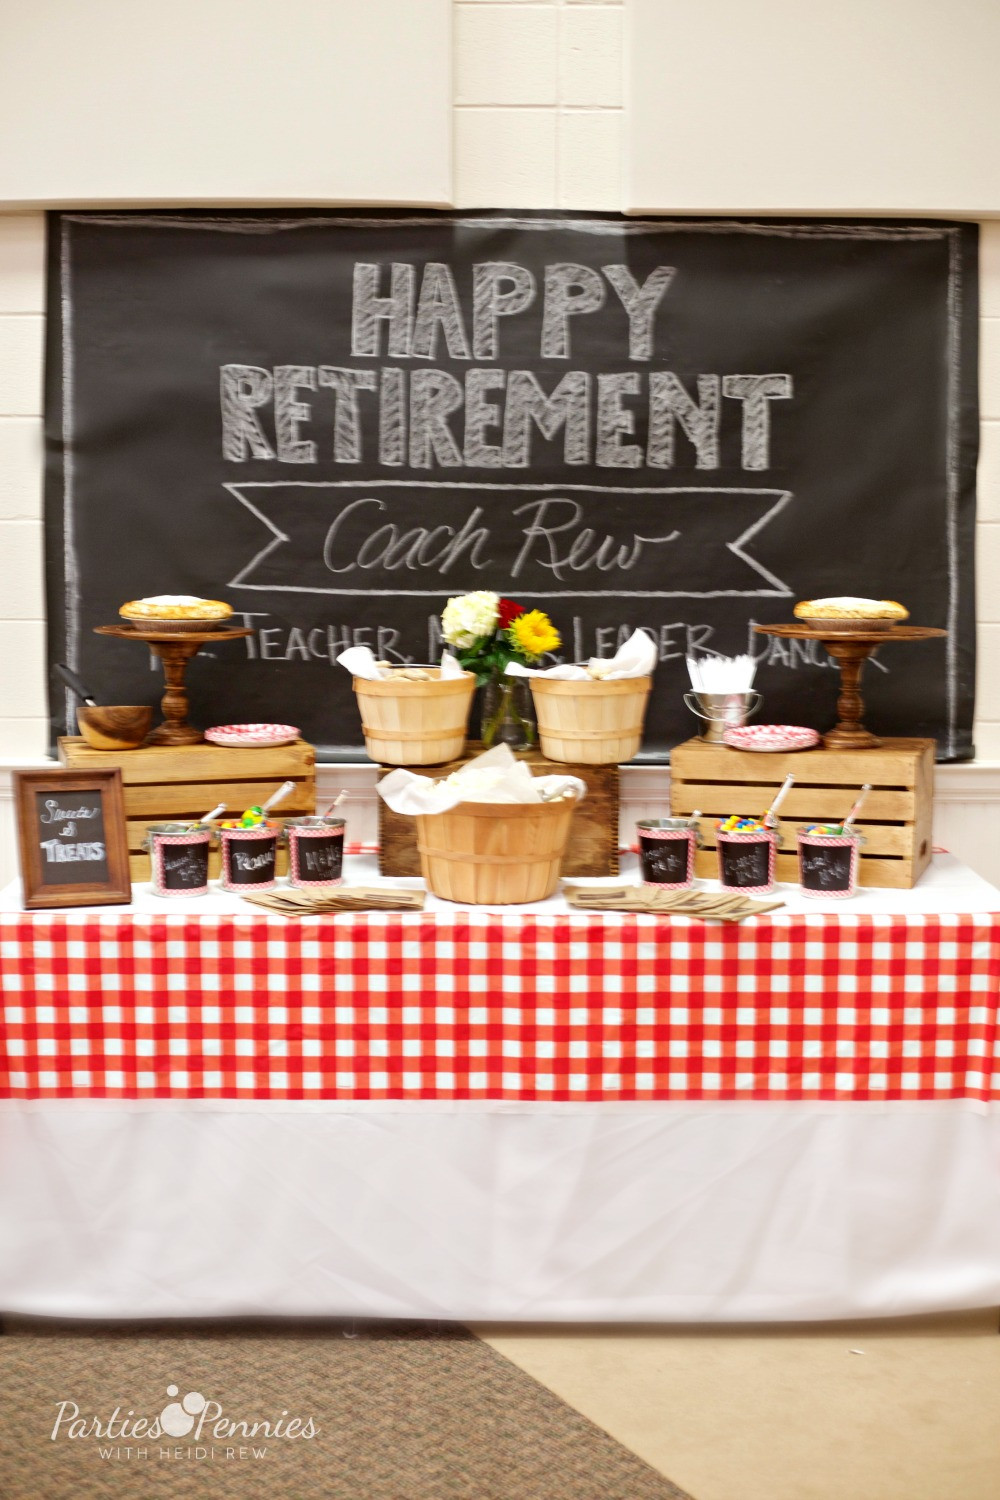 Brainstorming Retirement Party Ideas
 BBQ Retirement Party Parties for Pennies